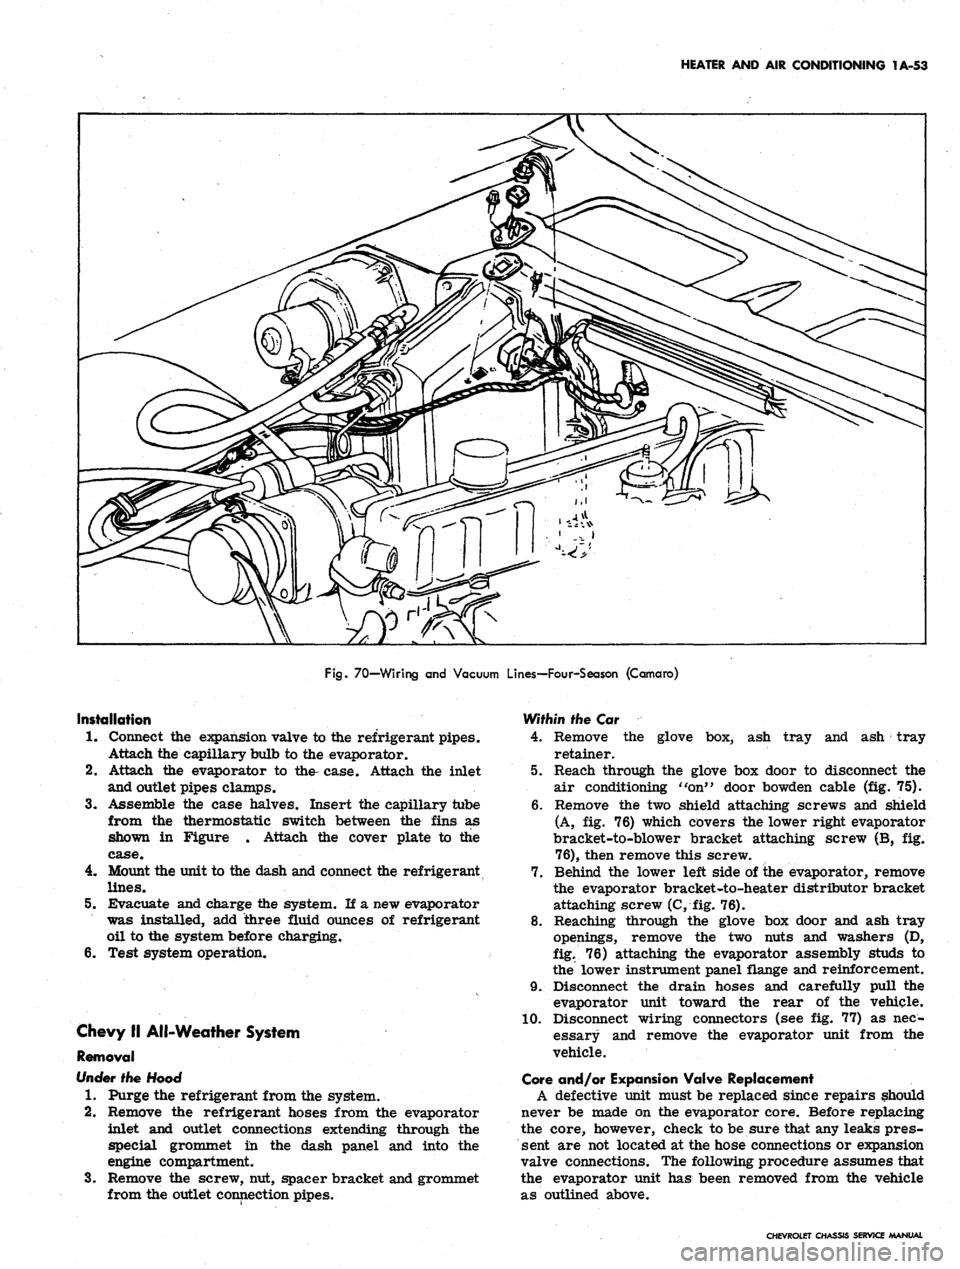 CHEVROLET CAMARO 1967 1.G Chassis Owners Guide 
HEATER AND AIR CONDITIONING 1A-53

Fig.
 70—Wiring and Vacuum Lines—Four-Season (Camaro)

Installation

1.
 Connect the expansion valve to the refrigerant pipes.

Attach the capillary bulb to the